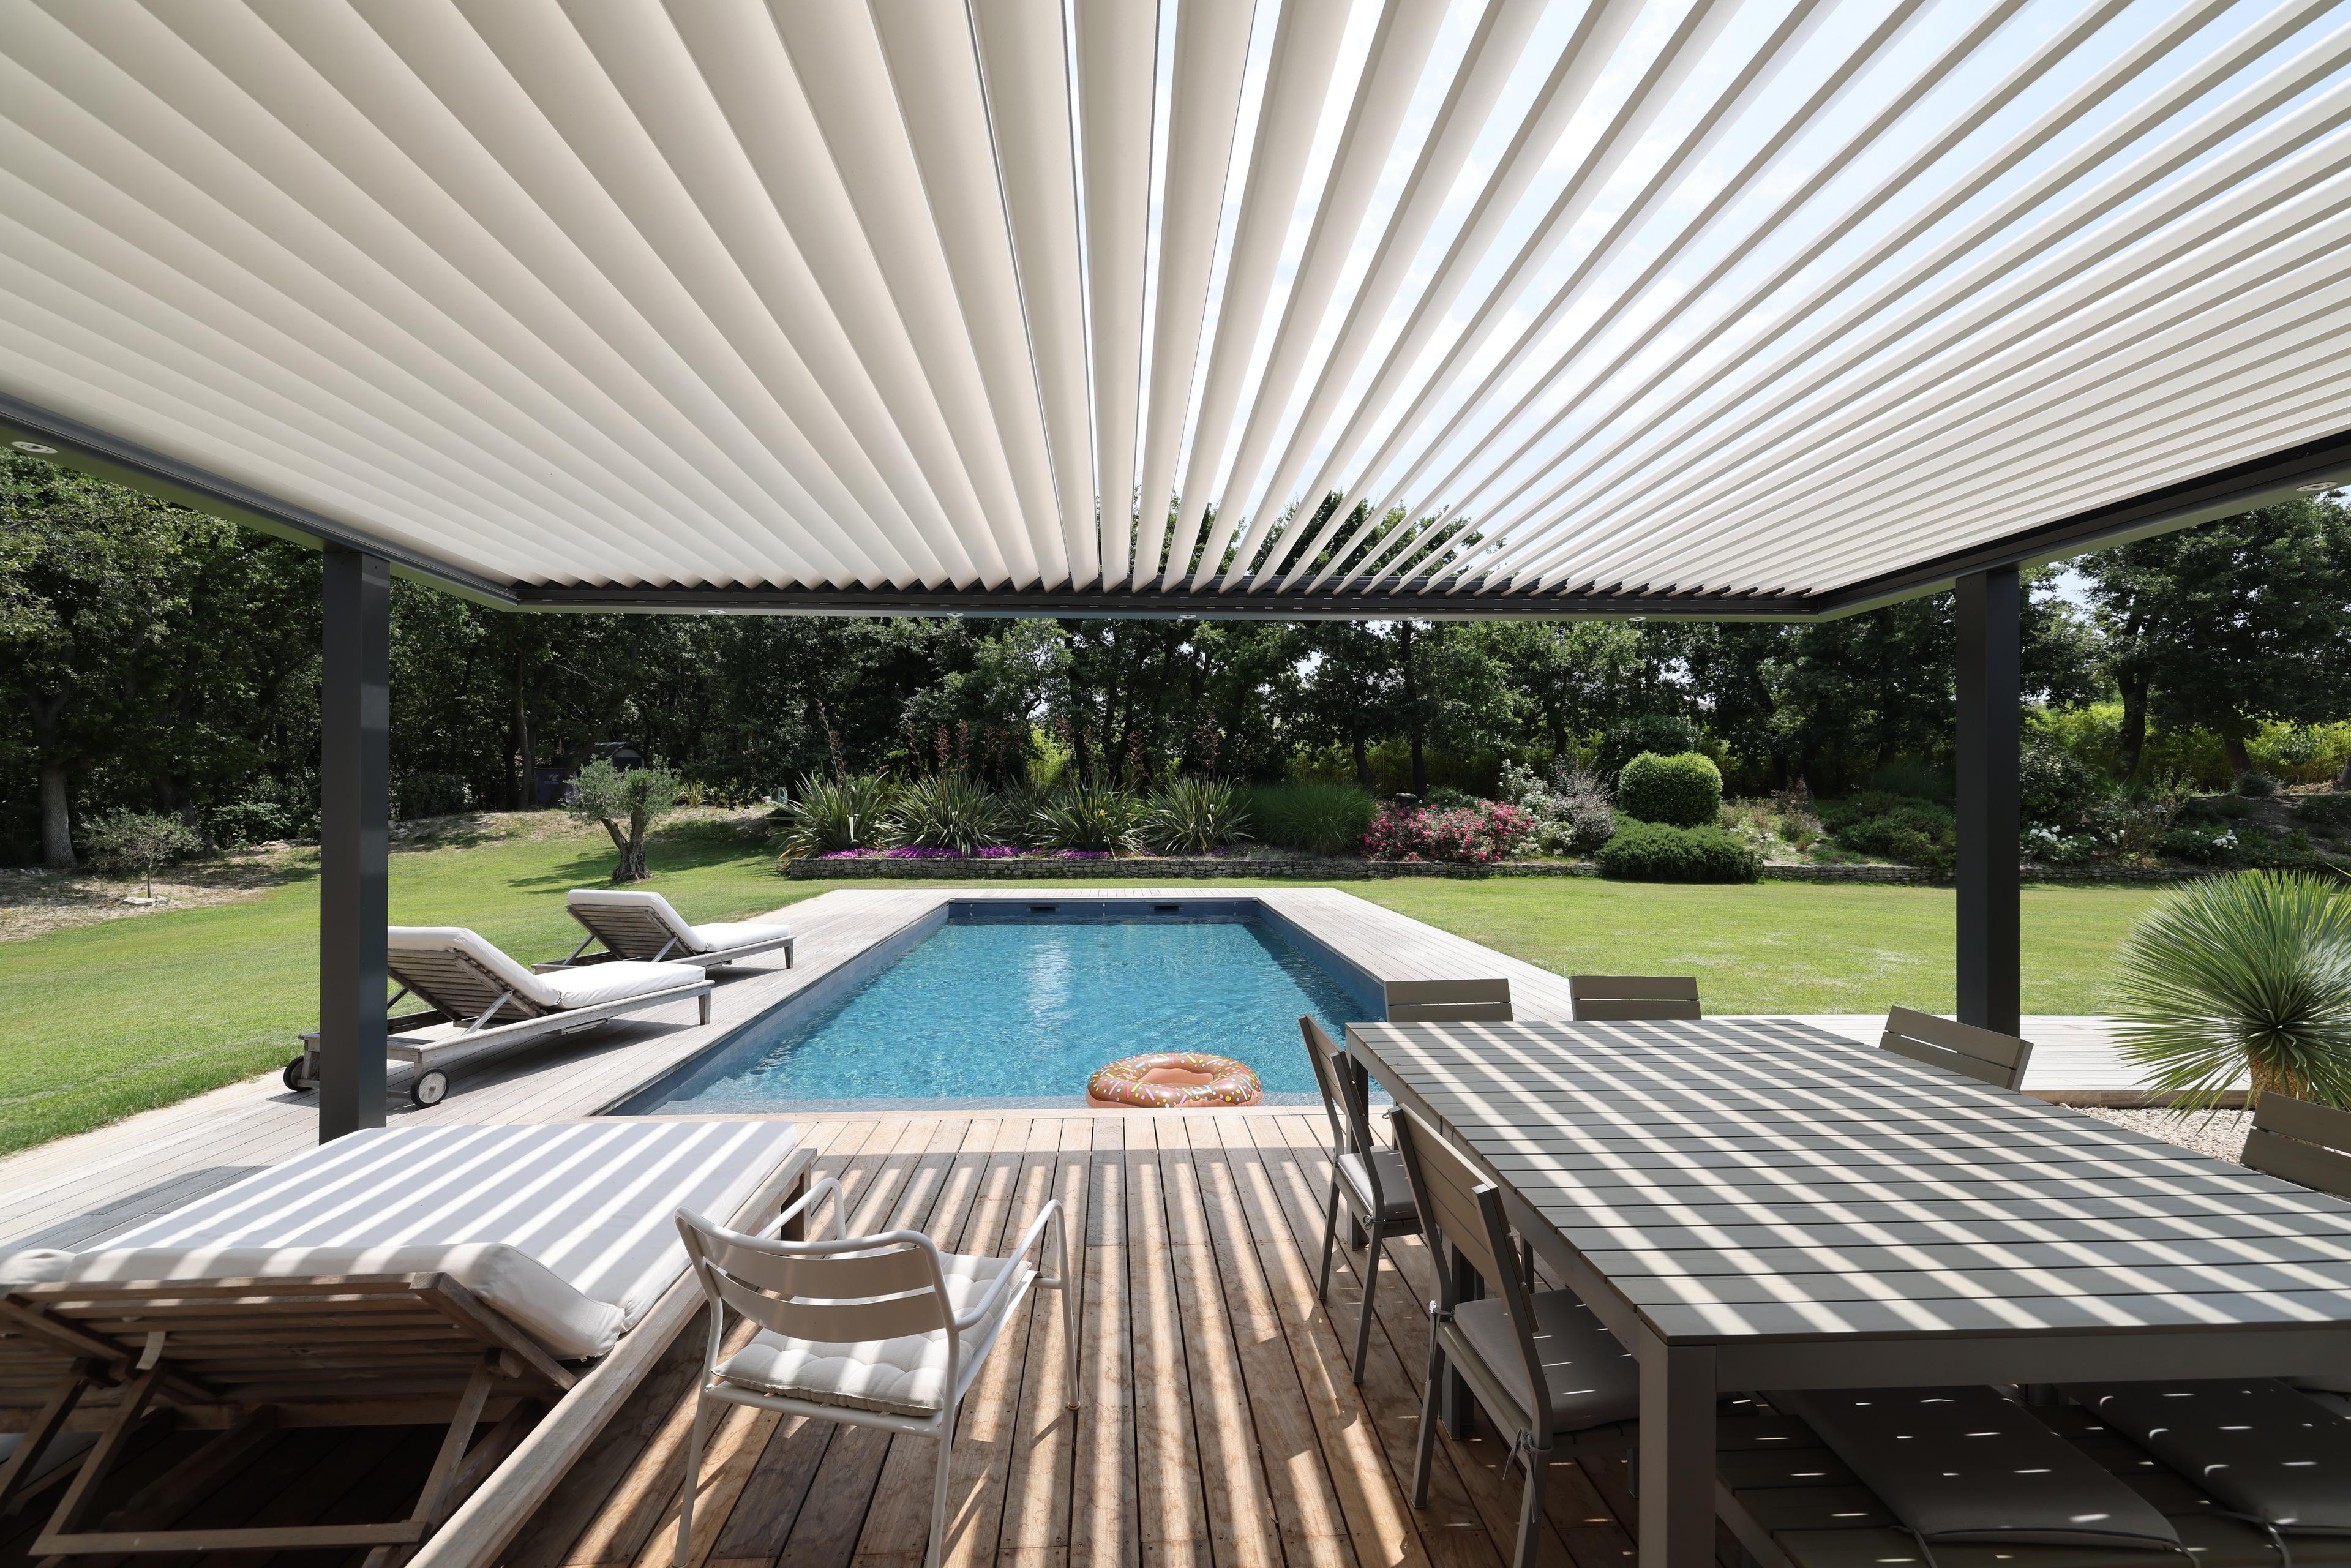 Bioclimatic pergola with pool, light and shade from below